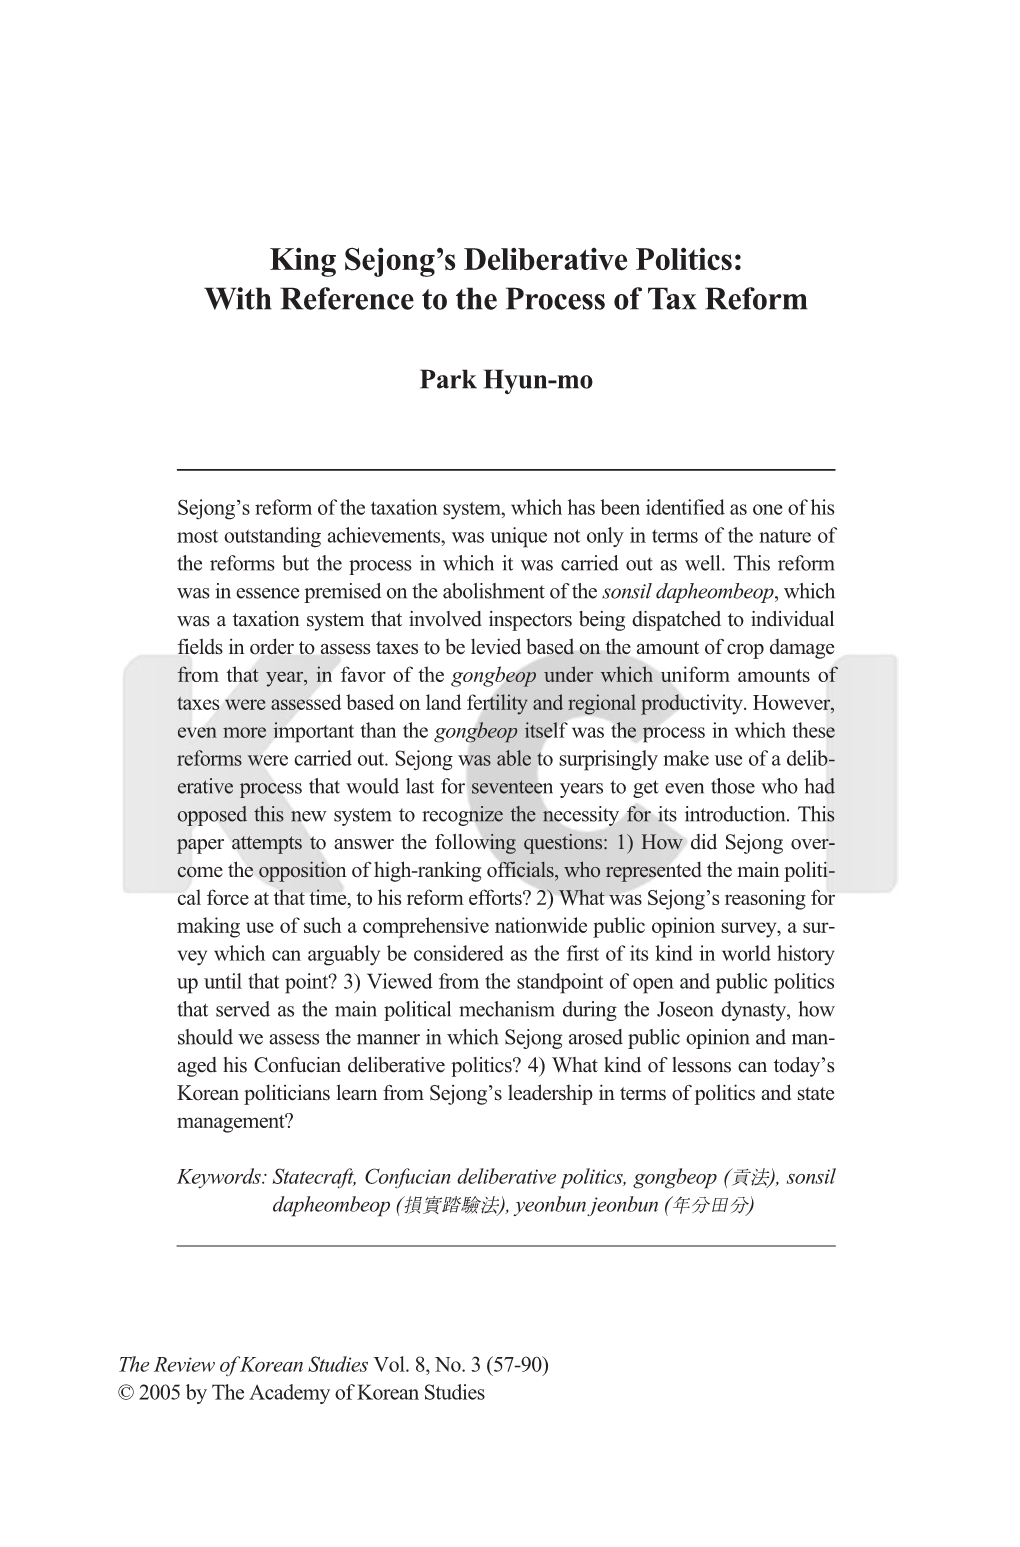 King Sejong's Deliberative Politics: with Reference to the Process of Tax Reform